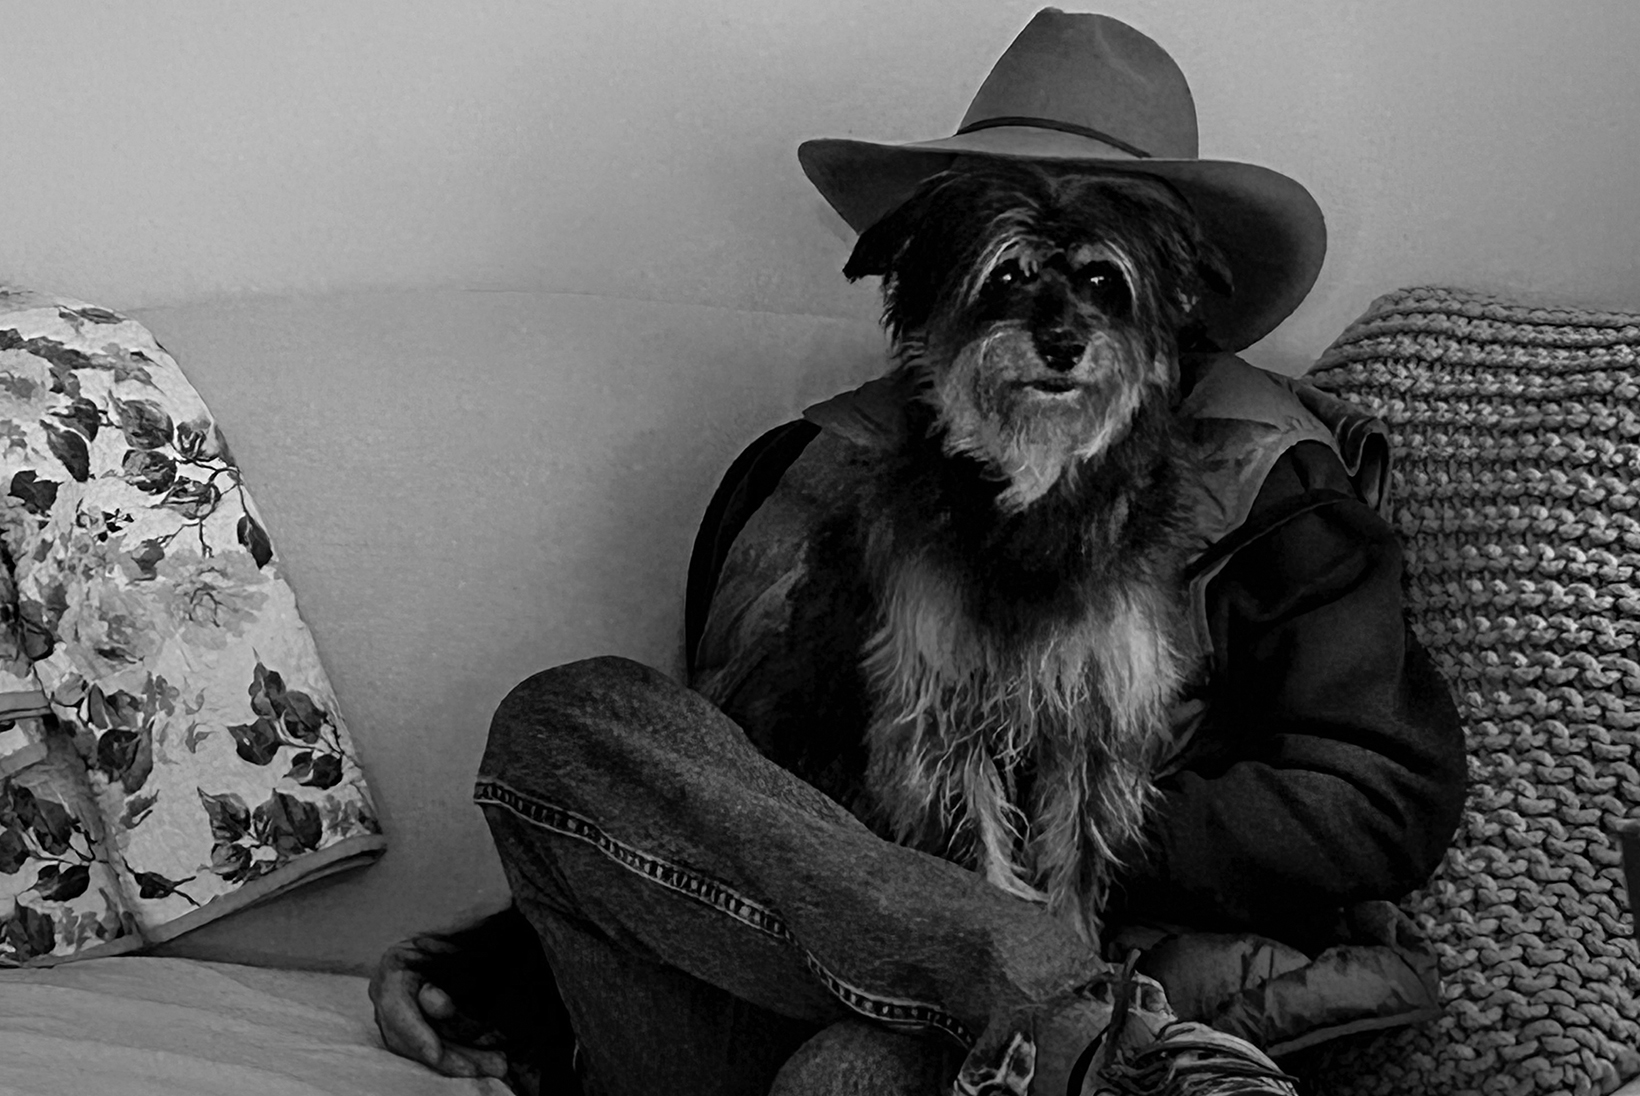 A man wearing a cowboy hat, jacket, and jeans sits on a couch with a dog on his lap. The dog is perfectly positioned so that its face appears to be the man’s under the hat.